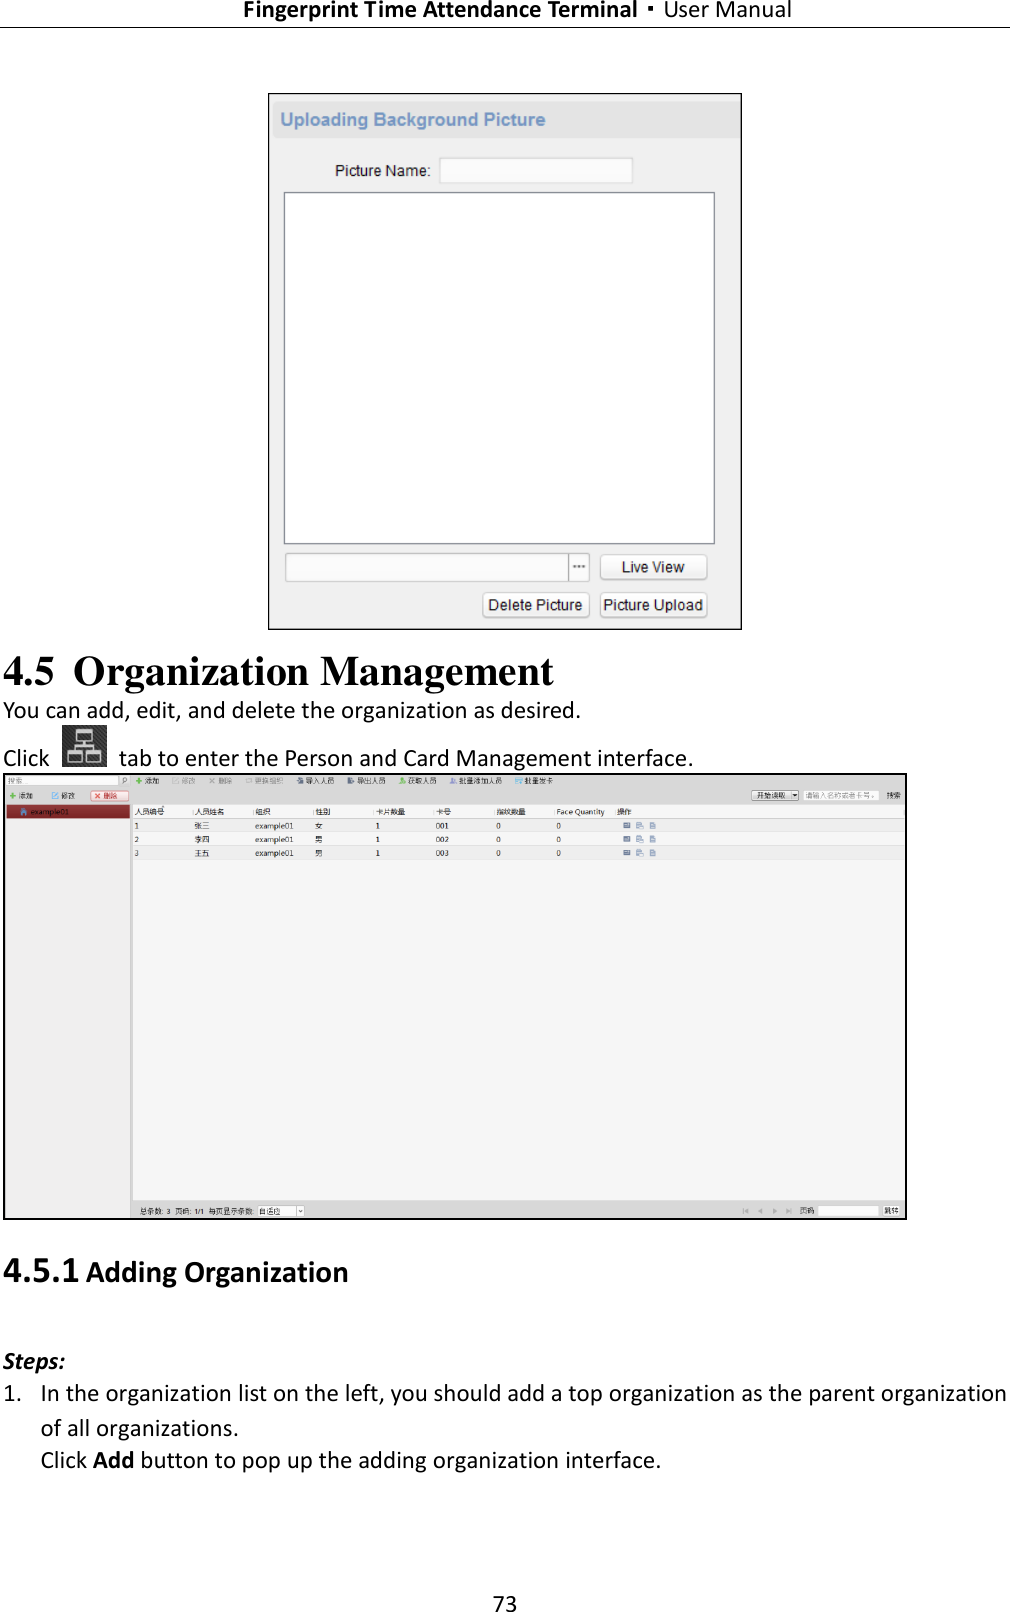   Fingerprint Time Attendance Terminal·User Manual 73   4.5 Organization Management You can add, edit, and delete the organization as desired. Click    tab to enter the Person and Card Management interface.  4.5.1 Adding Organization Steps: 1. In the organization list on the left, you should add a top organization as the parent organization of all organizations. Click Add button to pop up the adding organization interface. 